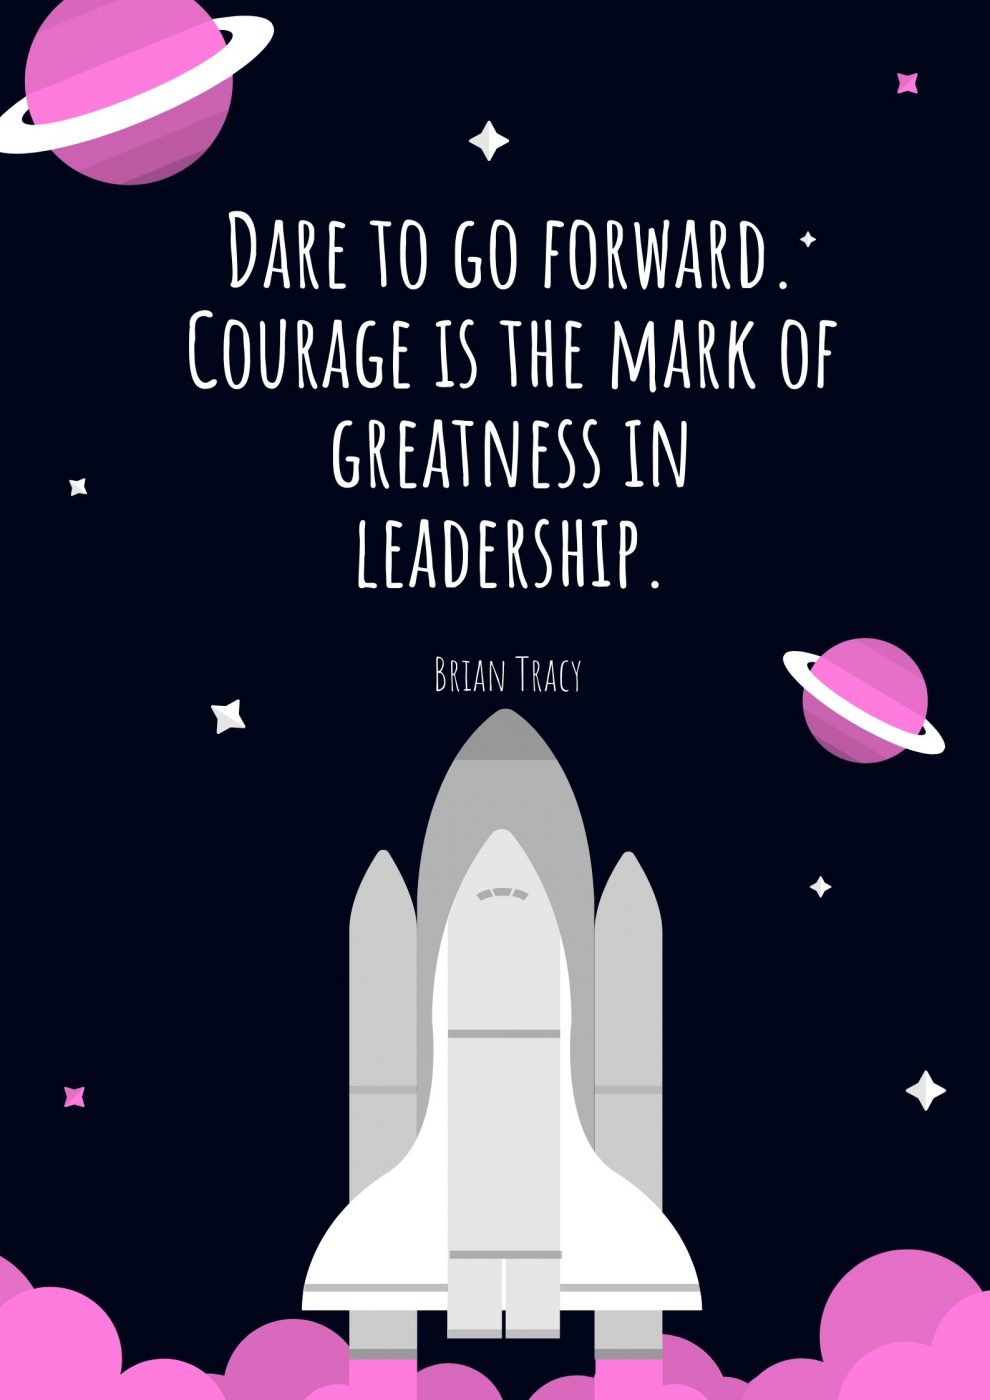 Brian Tracy Motivational Quote About Leadership